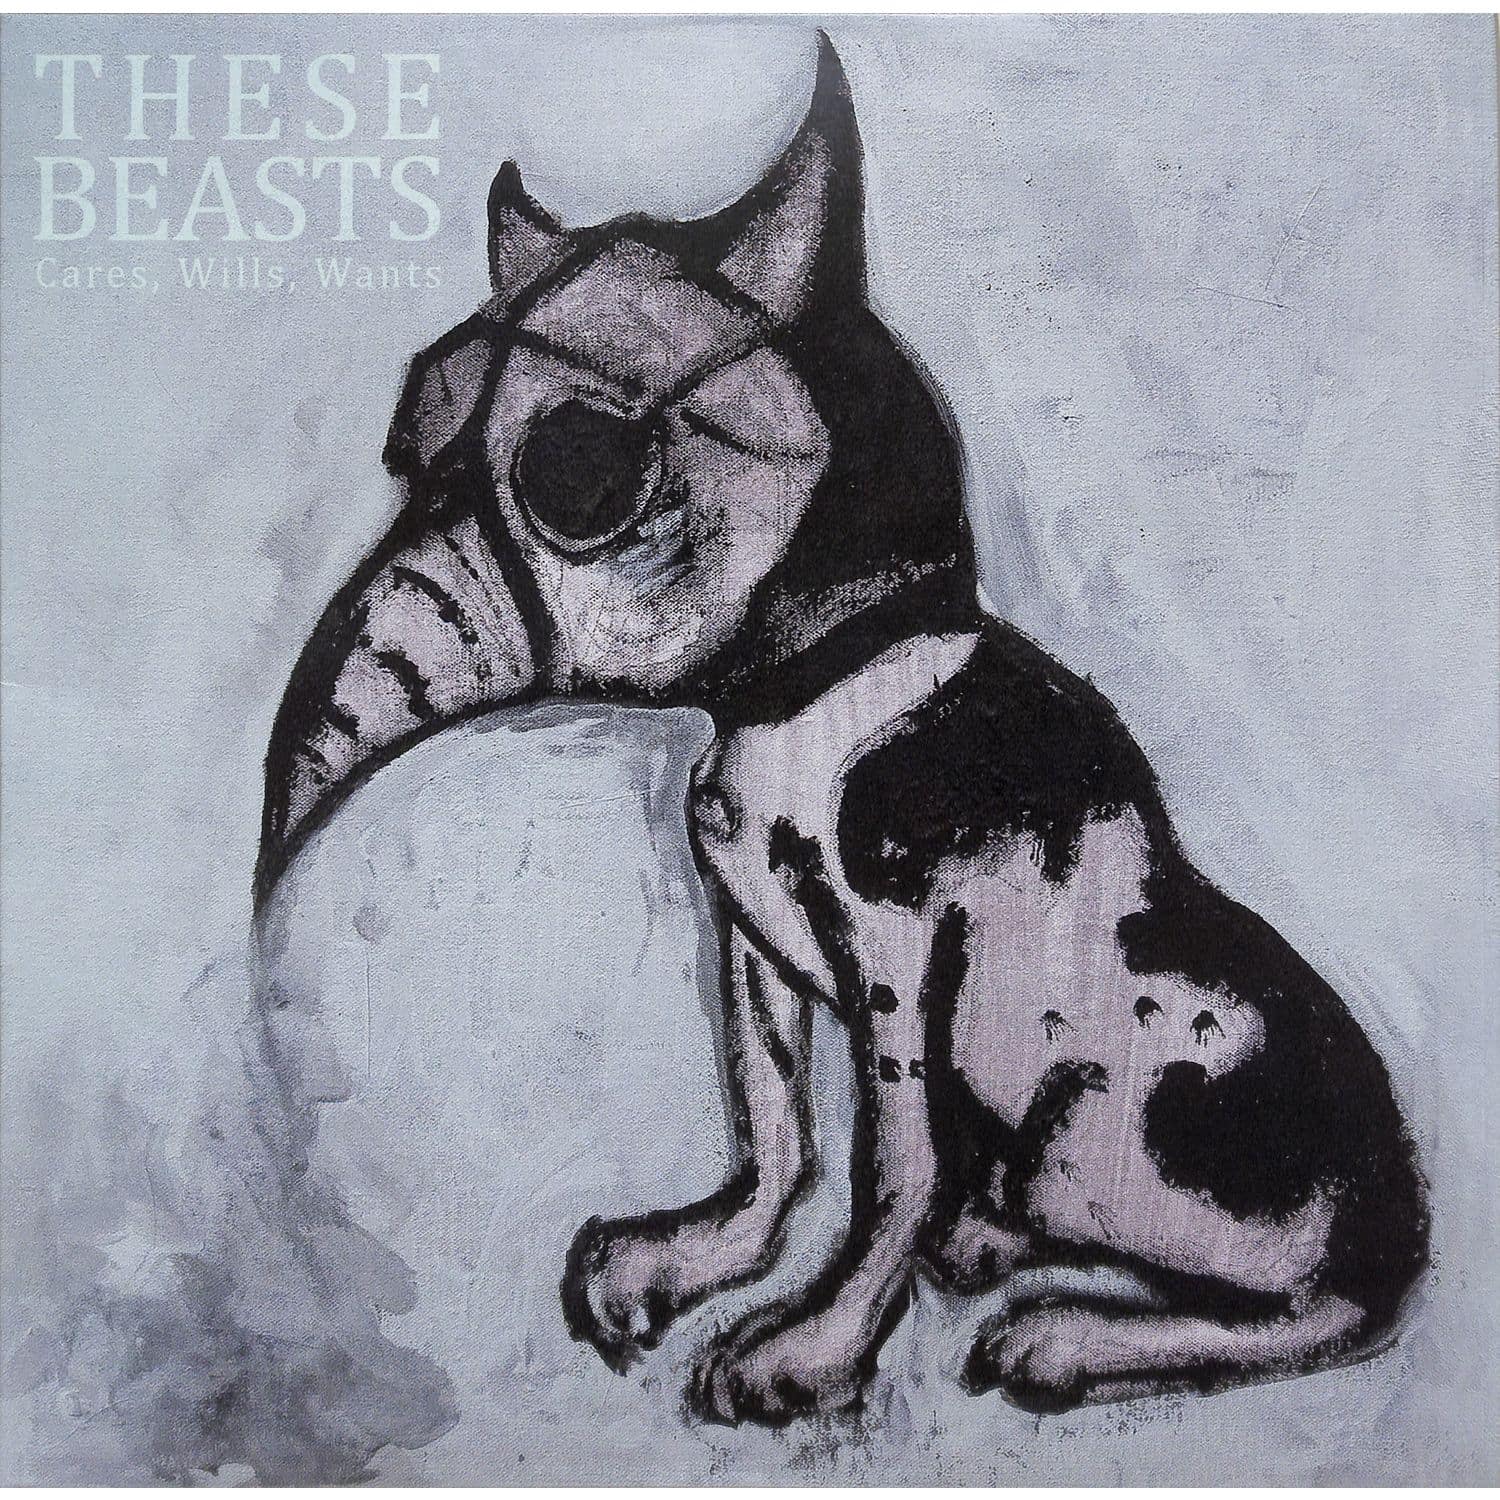 These Beasts - CARES, WILLS, WANTS 